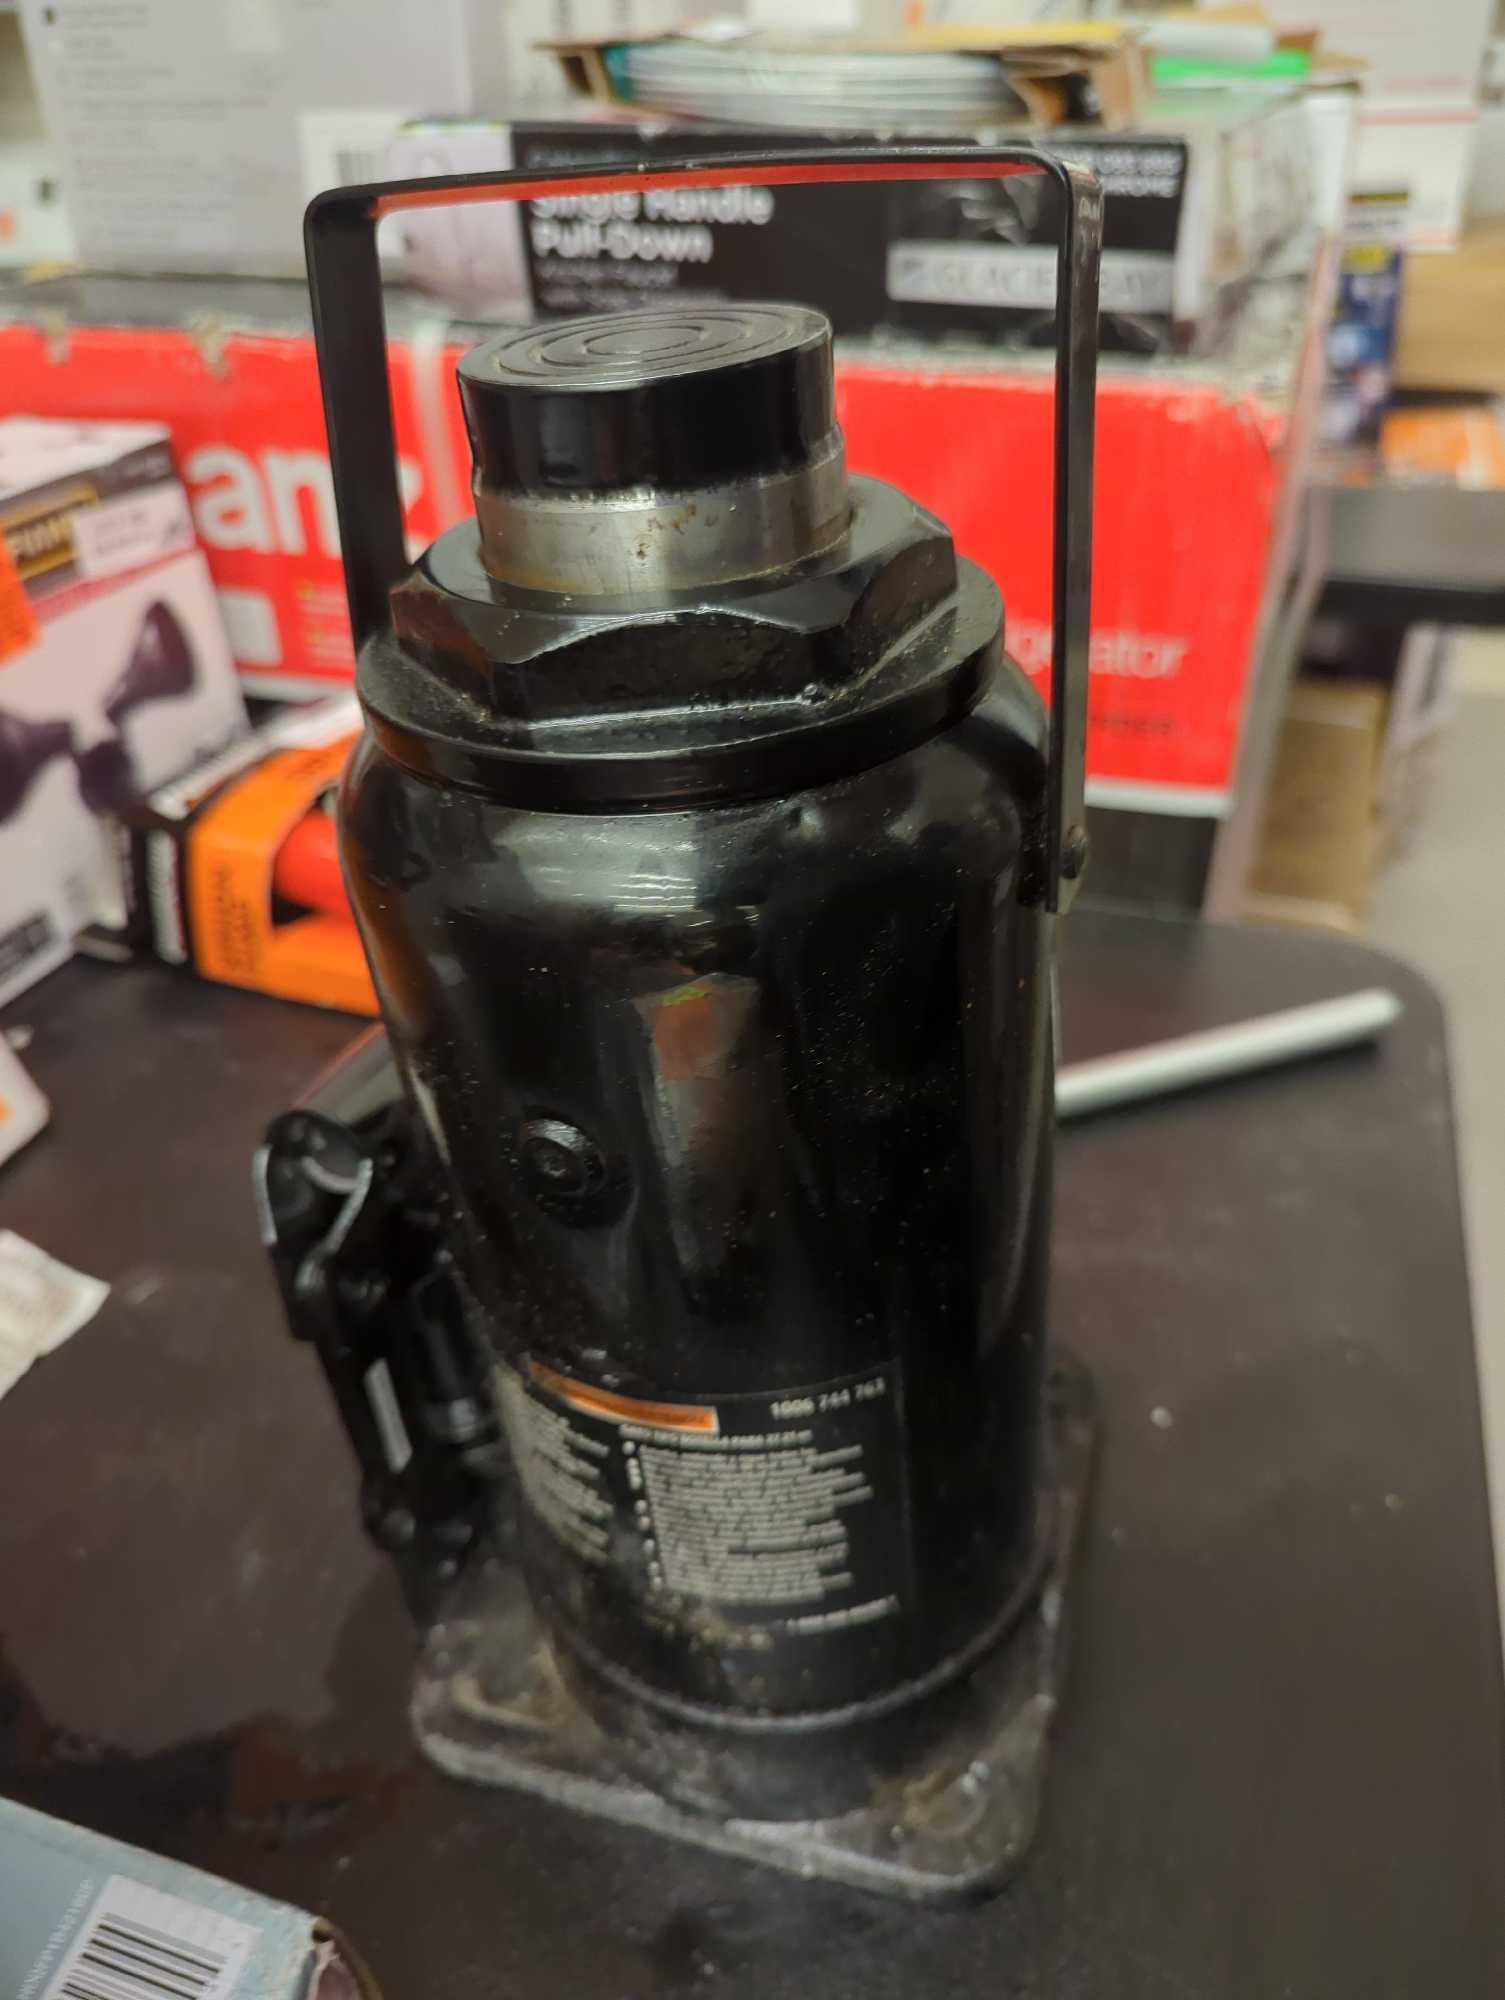 Husky (Damaged) 30-Ton Bottle Car Jack, Retail Price $90, Appears to be Used, Missing Hydrologic